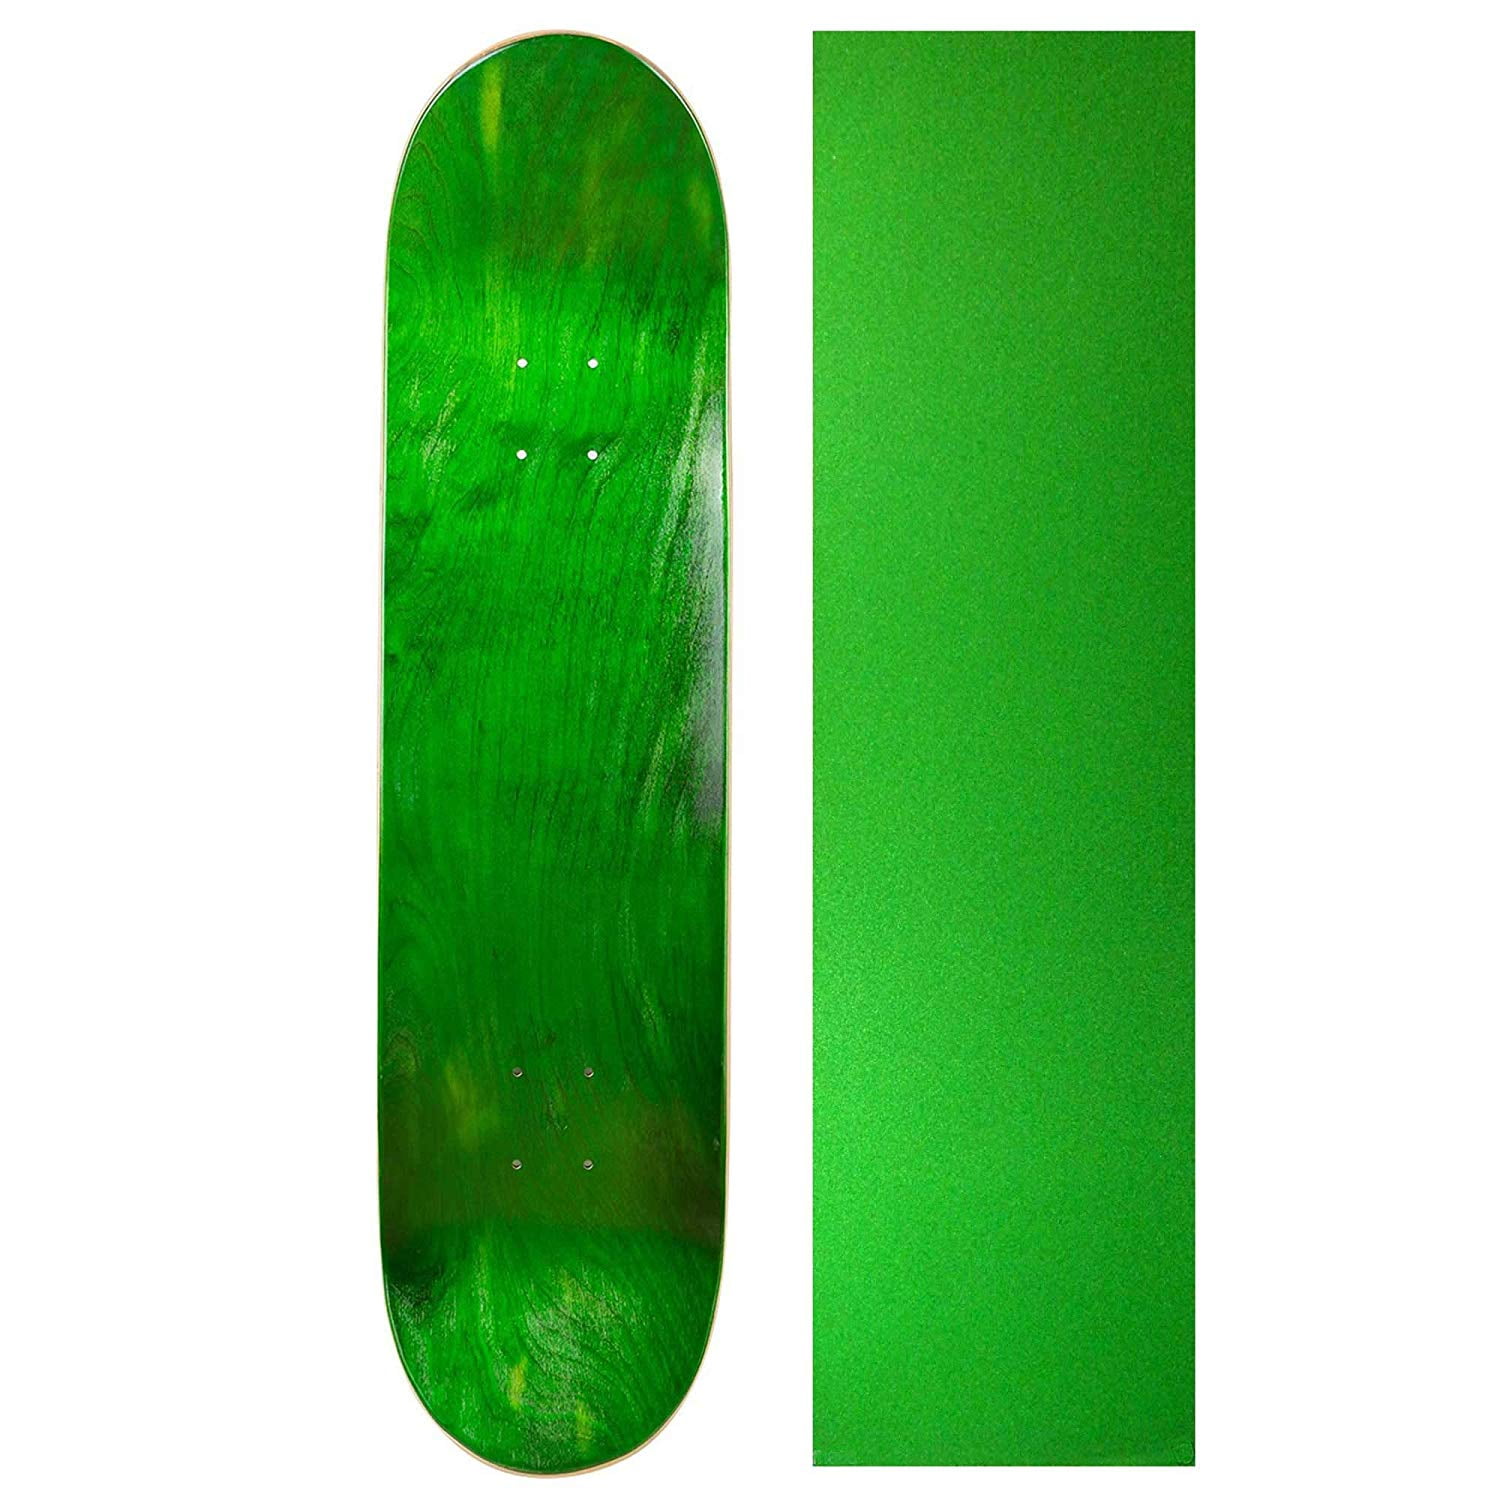 Cal 7 Blank Skateboard Deck with Color Grip Tape 